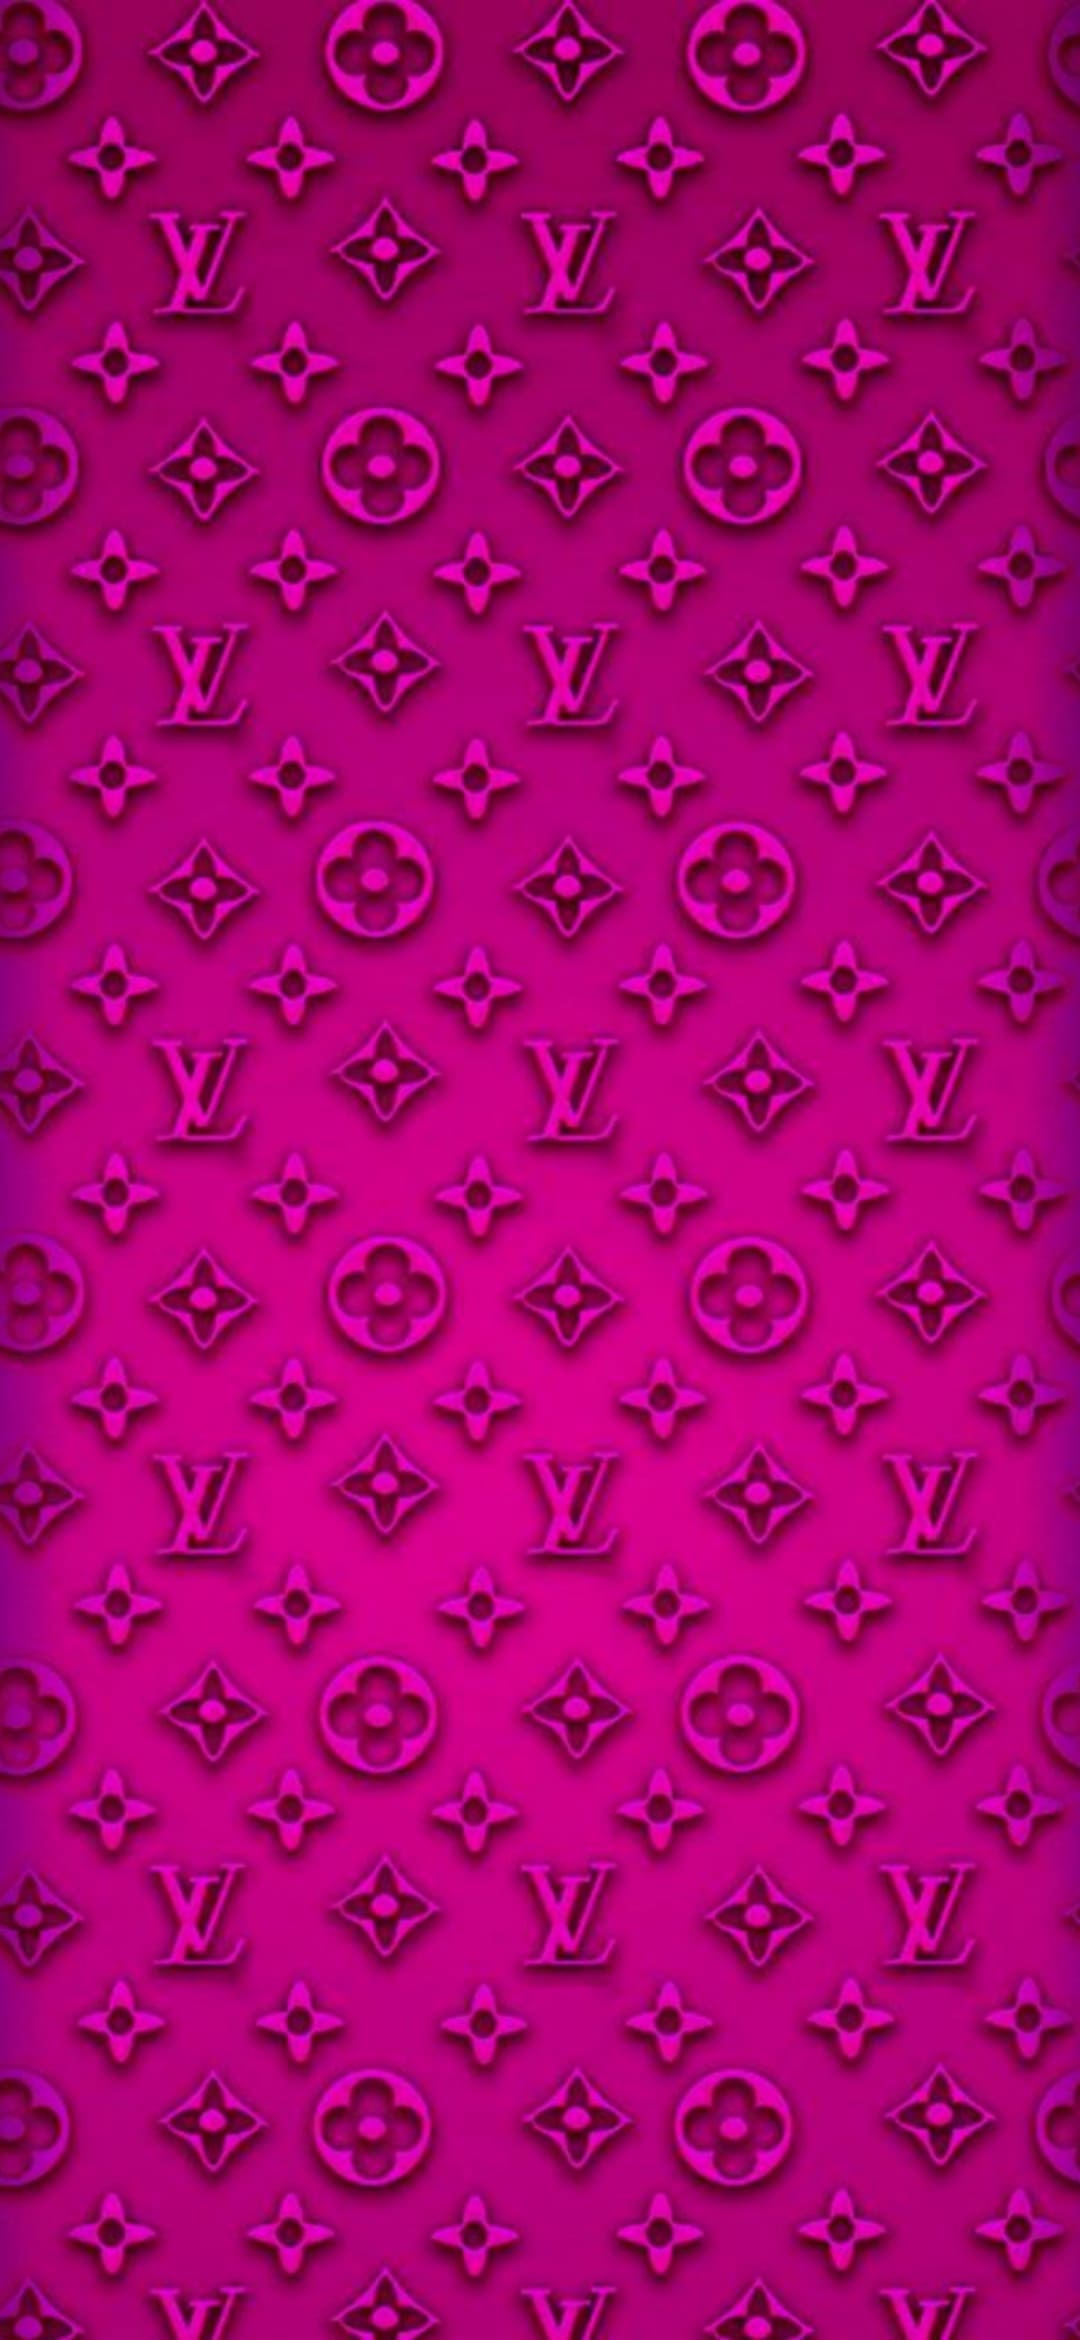 Louis Vuitton Wallpapers Smartphone - KoLPaPer - Awesome Free HD Wallpapers